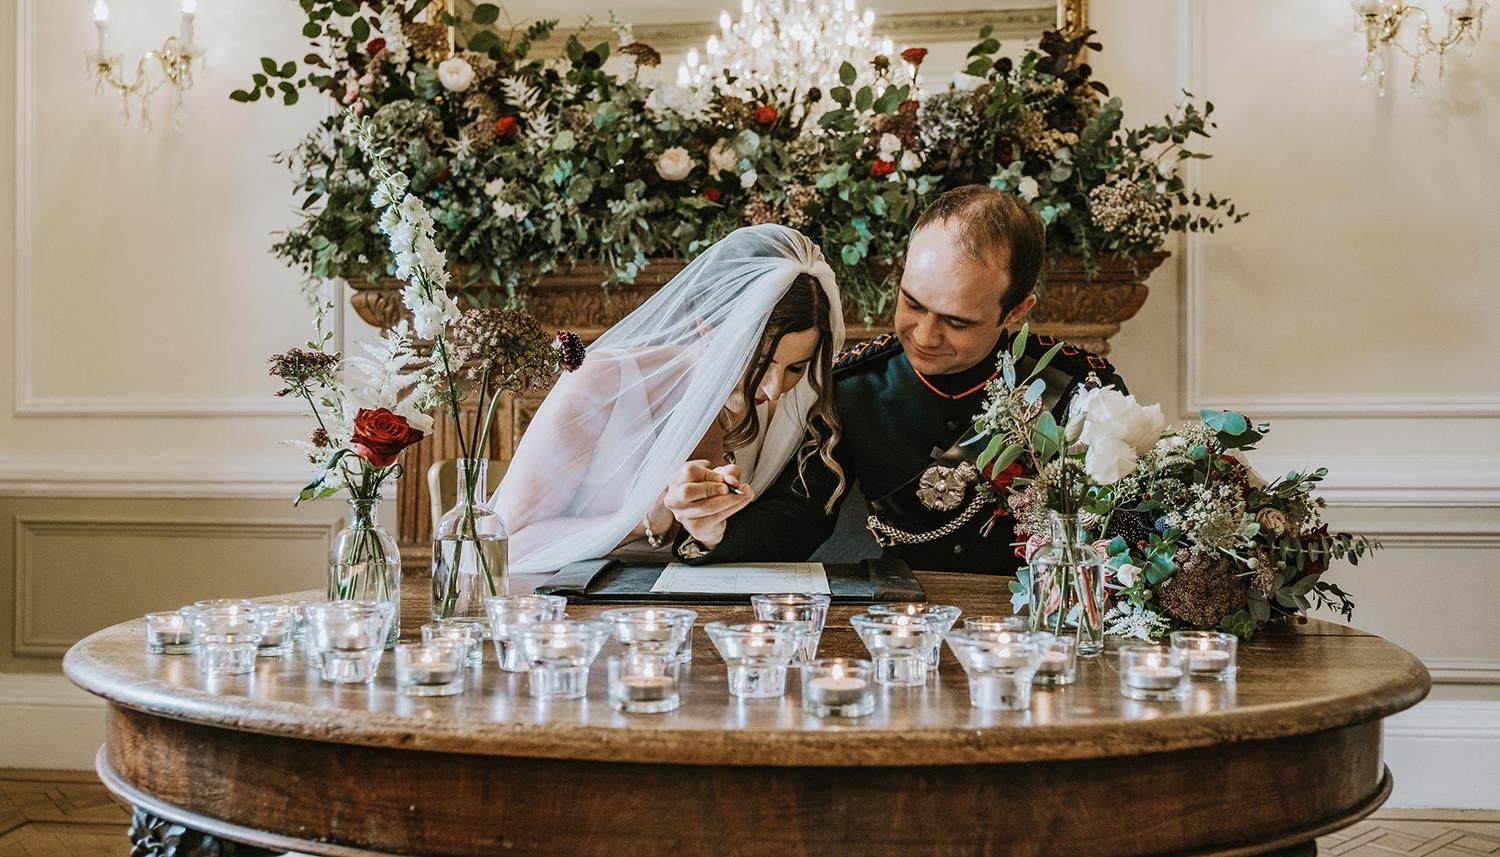 Signing the register. Photo Credit: We are the Wild Photography